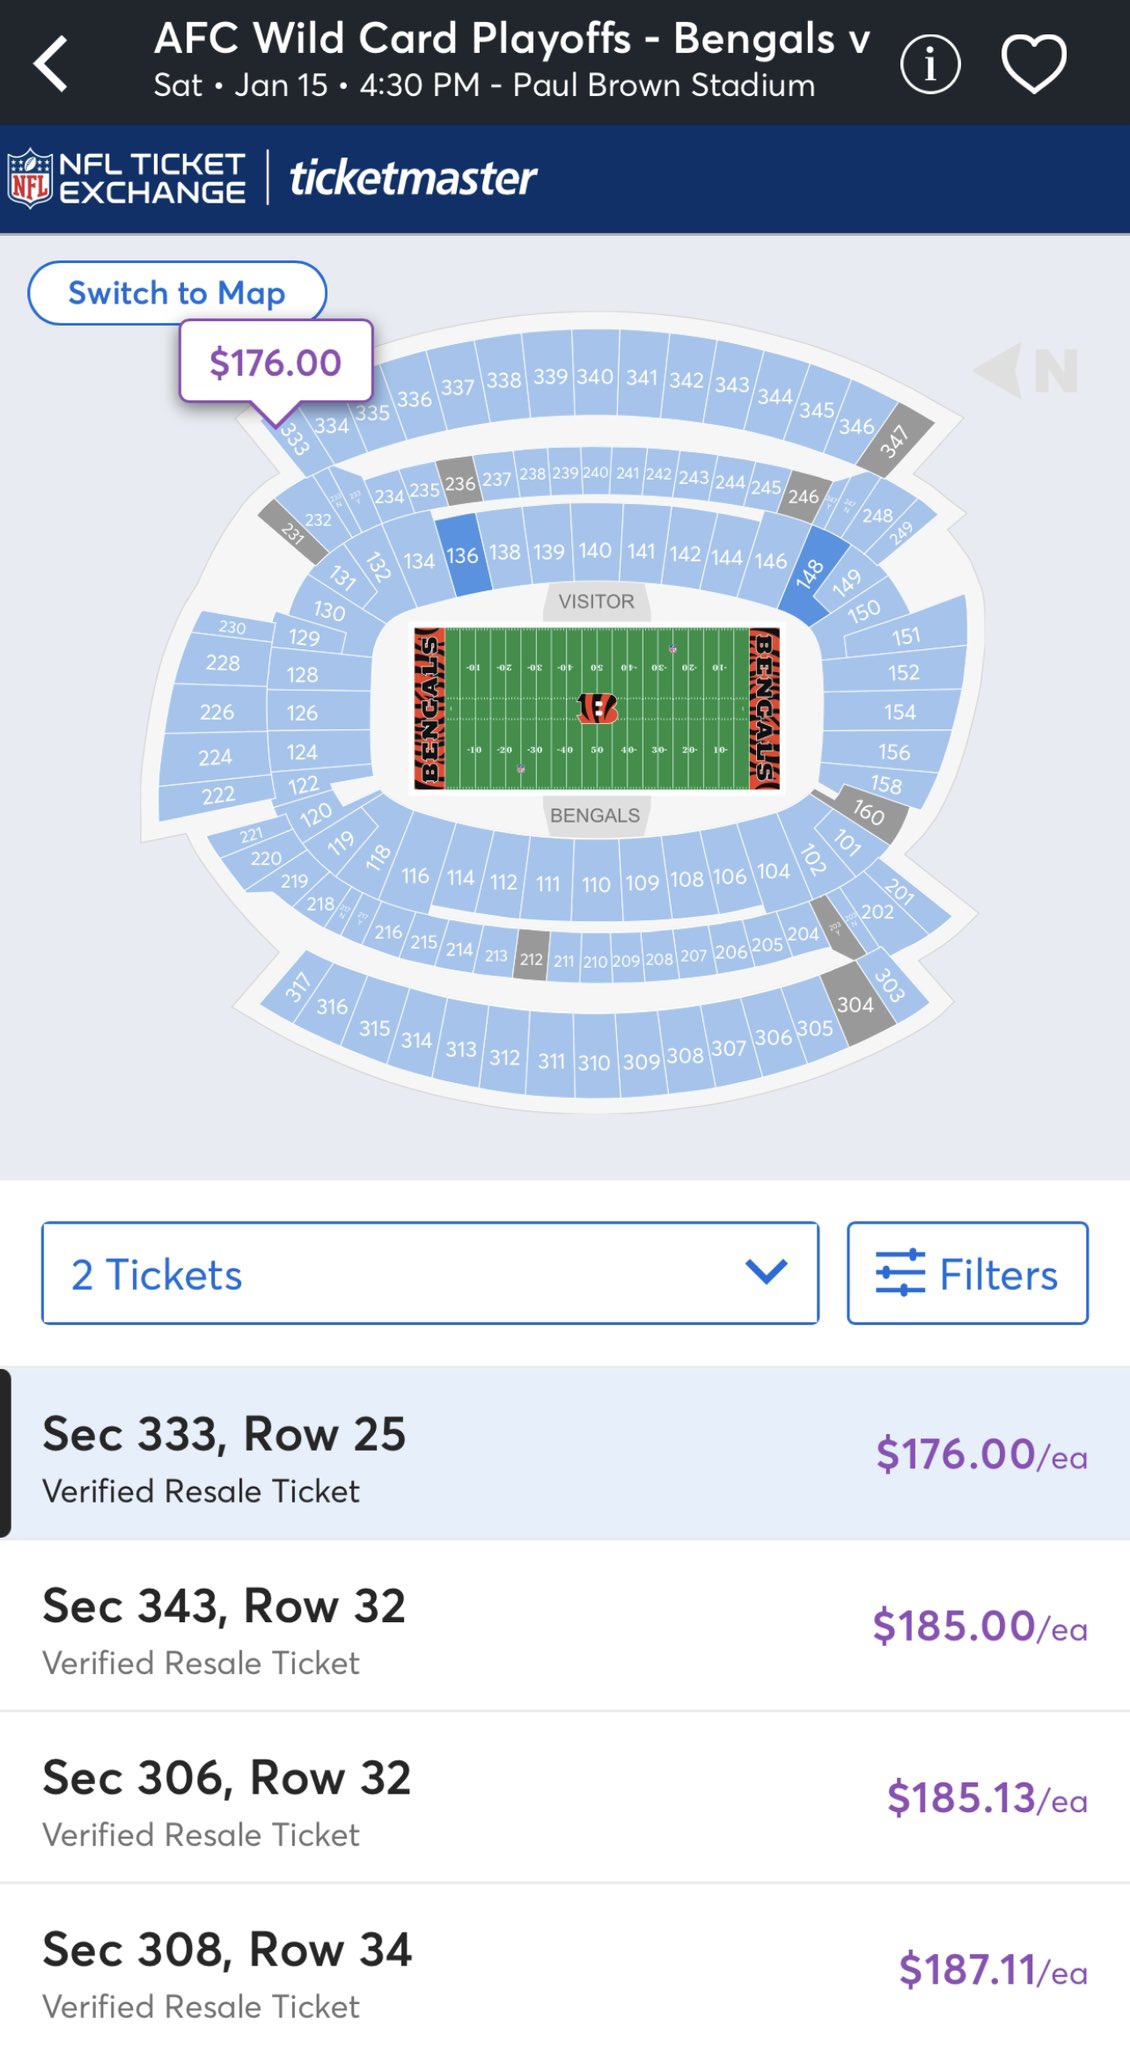 Mick Akers on Twitter: 'Cheapest tix for Saturday's Raiders/Bengals Wild  Card game in Cincinnati listed at $167 & $176 on StubHub and  TicketMaster (searching for 2). StubHub listing 3,220 available tickets.  #vegas #